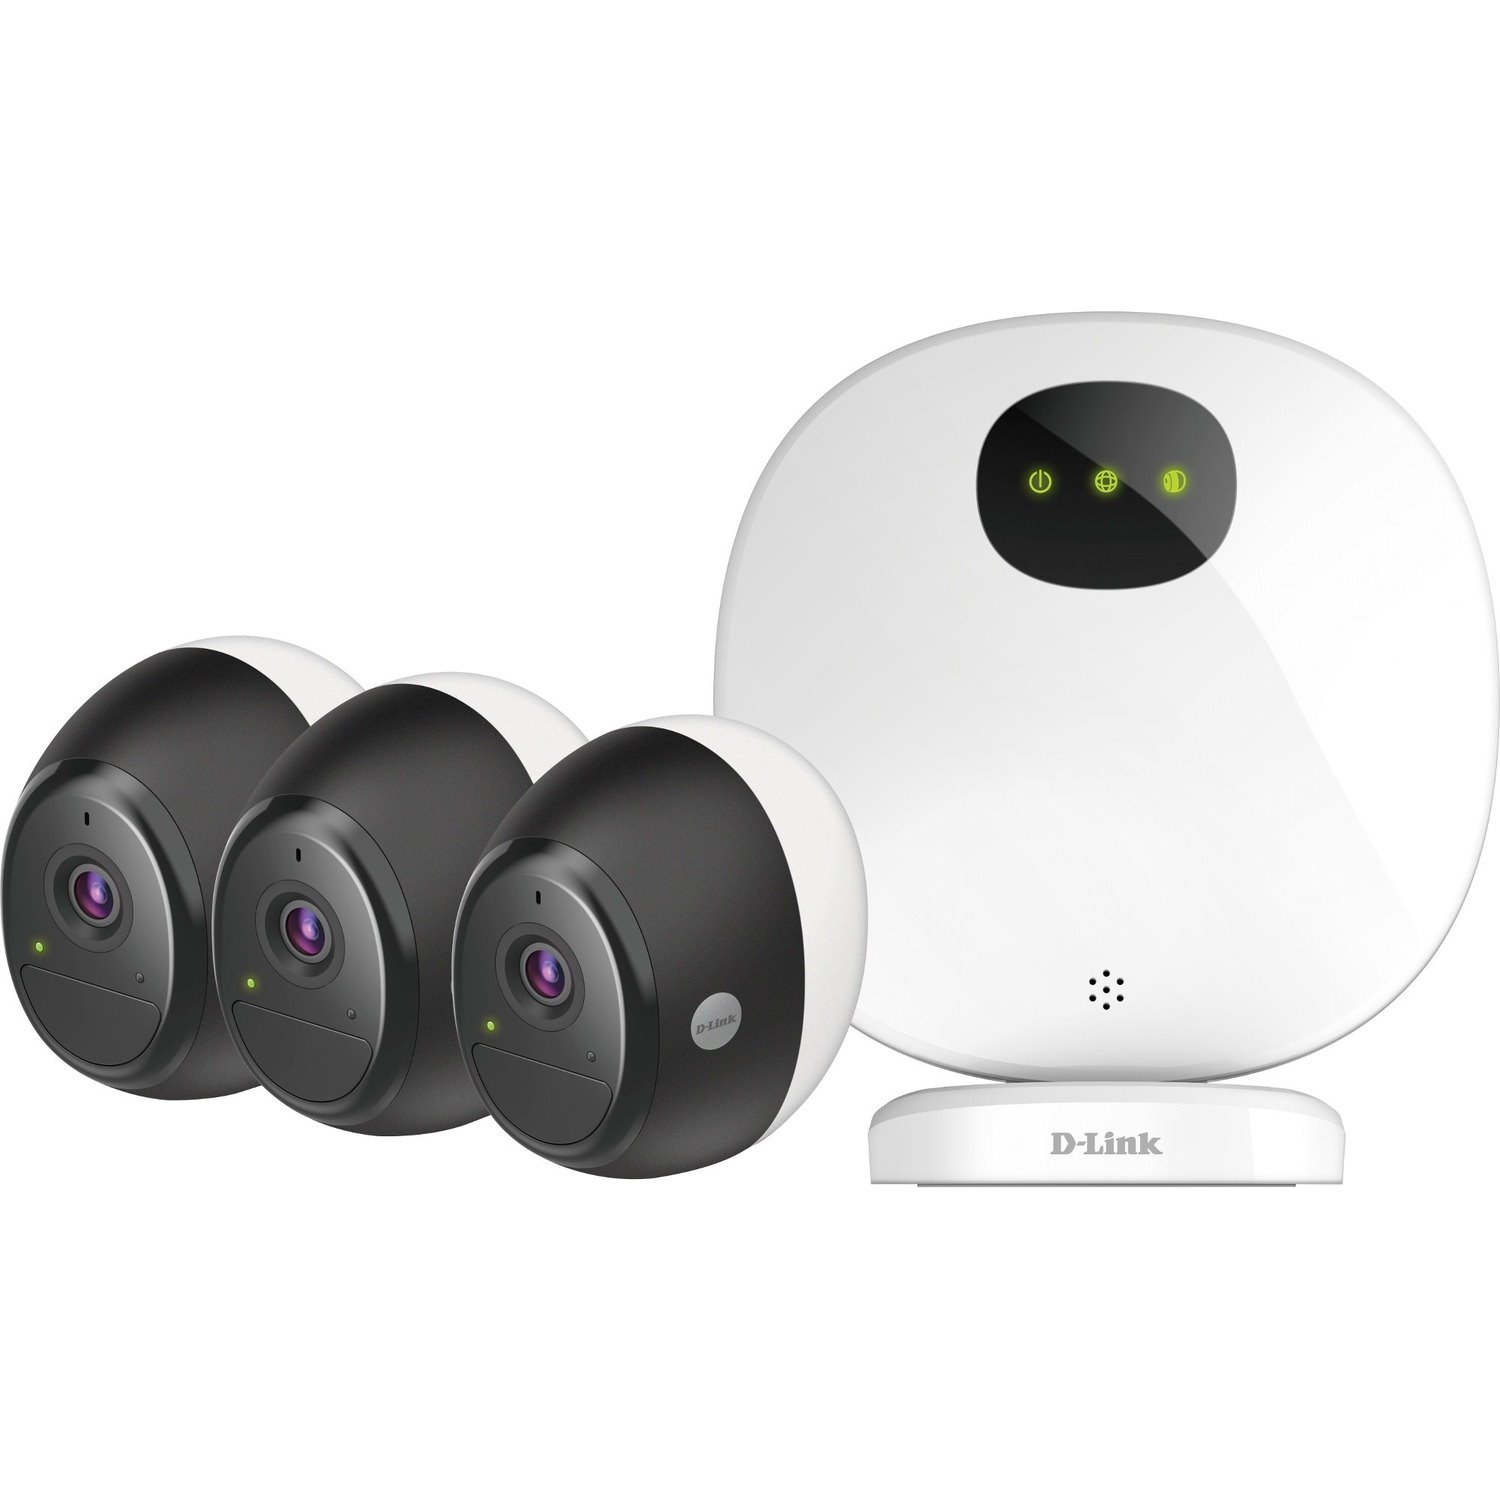 D-Link Omna 2 Megapixel Night Vision Wireless, Wired Video Surveillance System